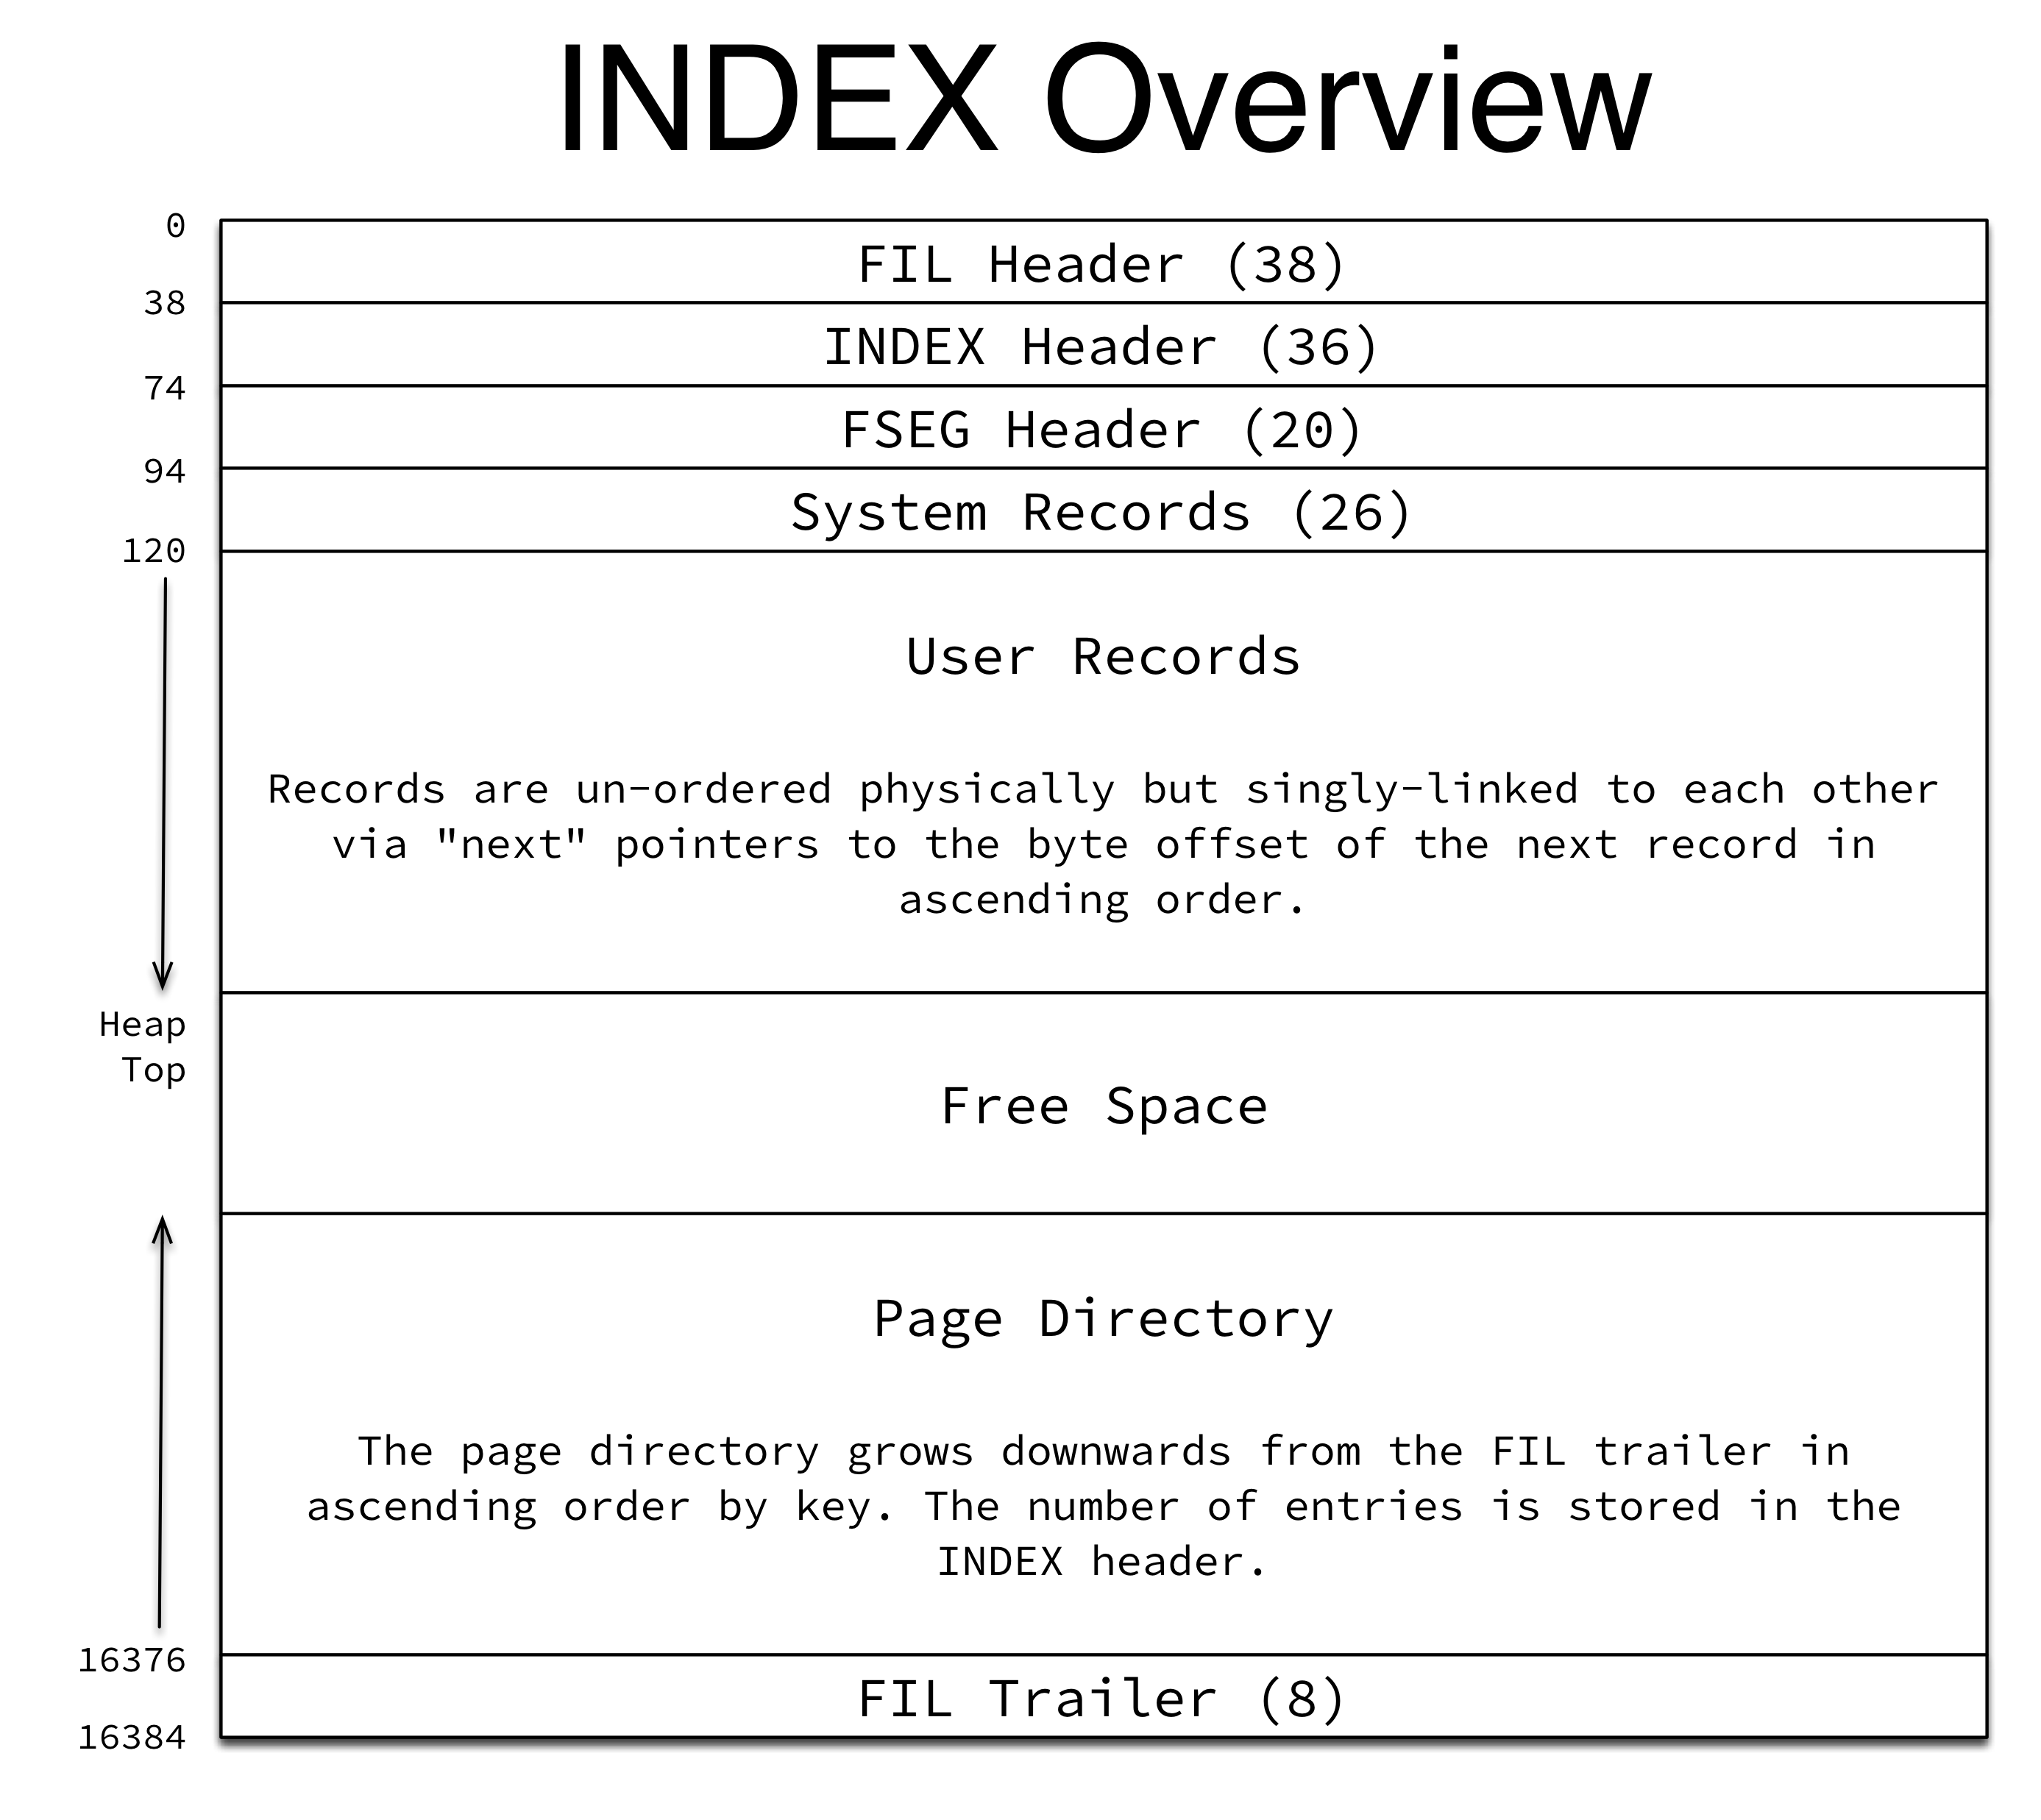 INODE Page Overview